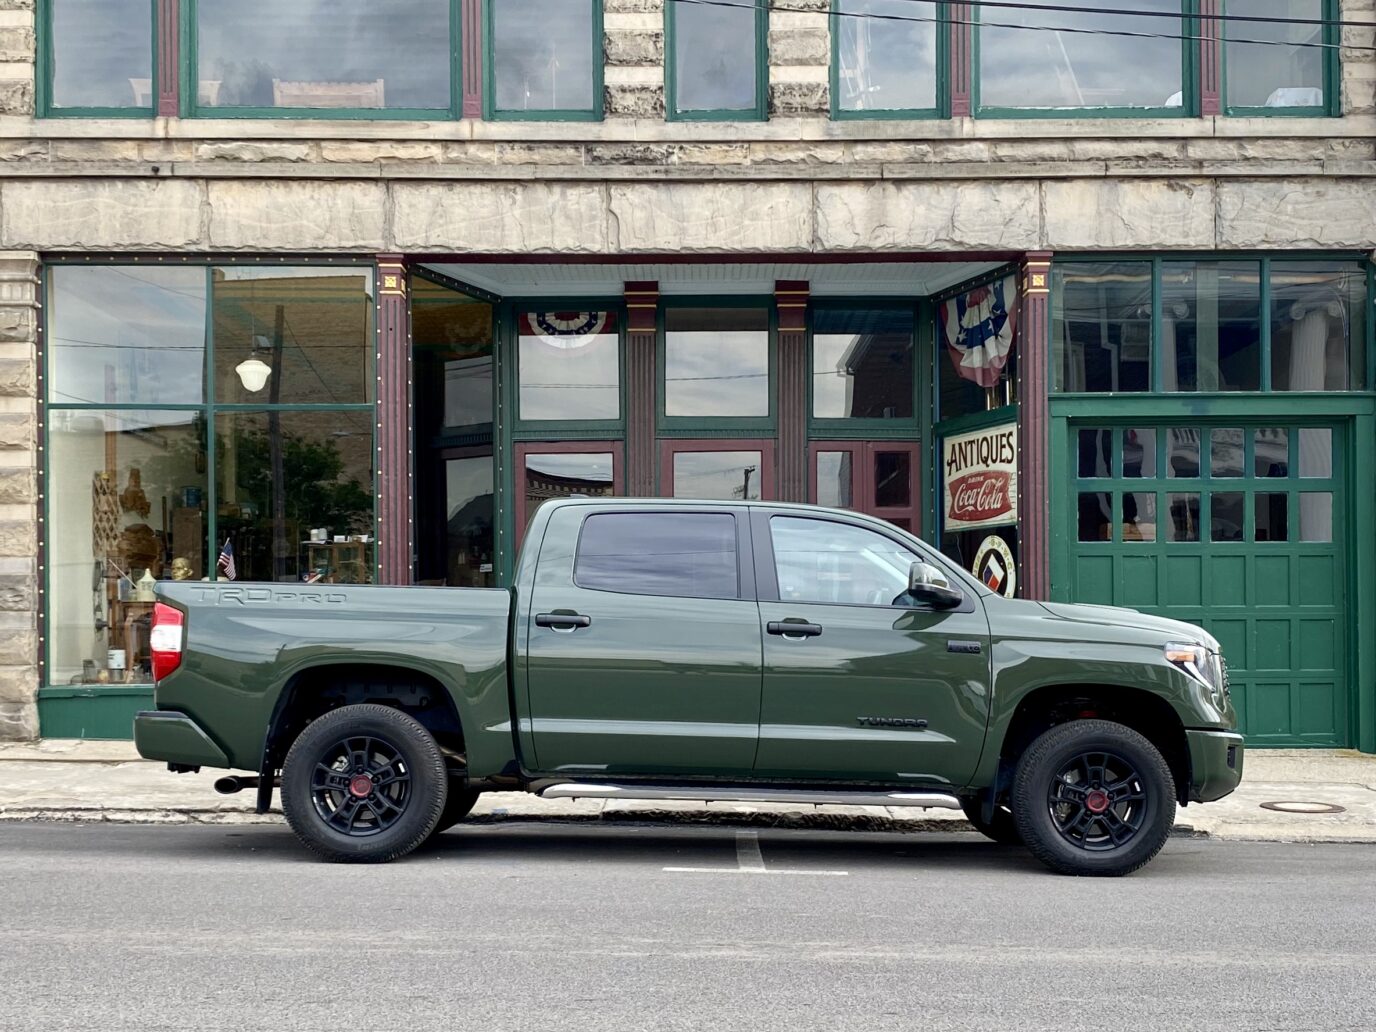 2020 Toyota Tundra TRD Pro Review